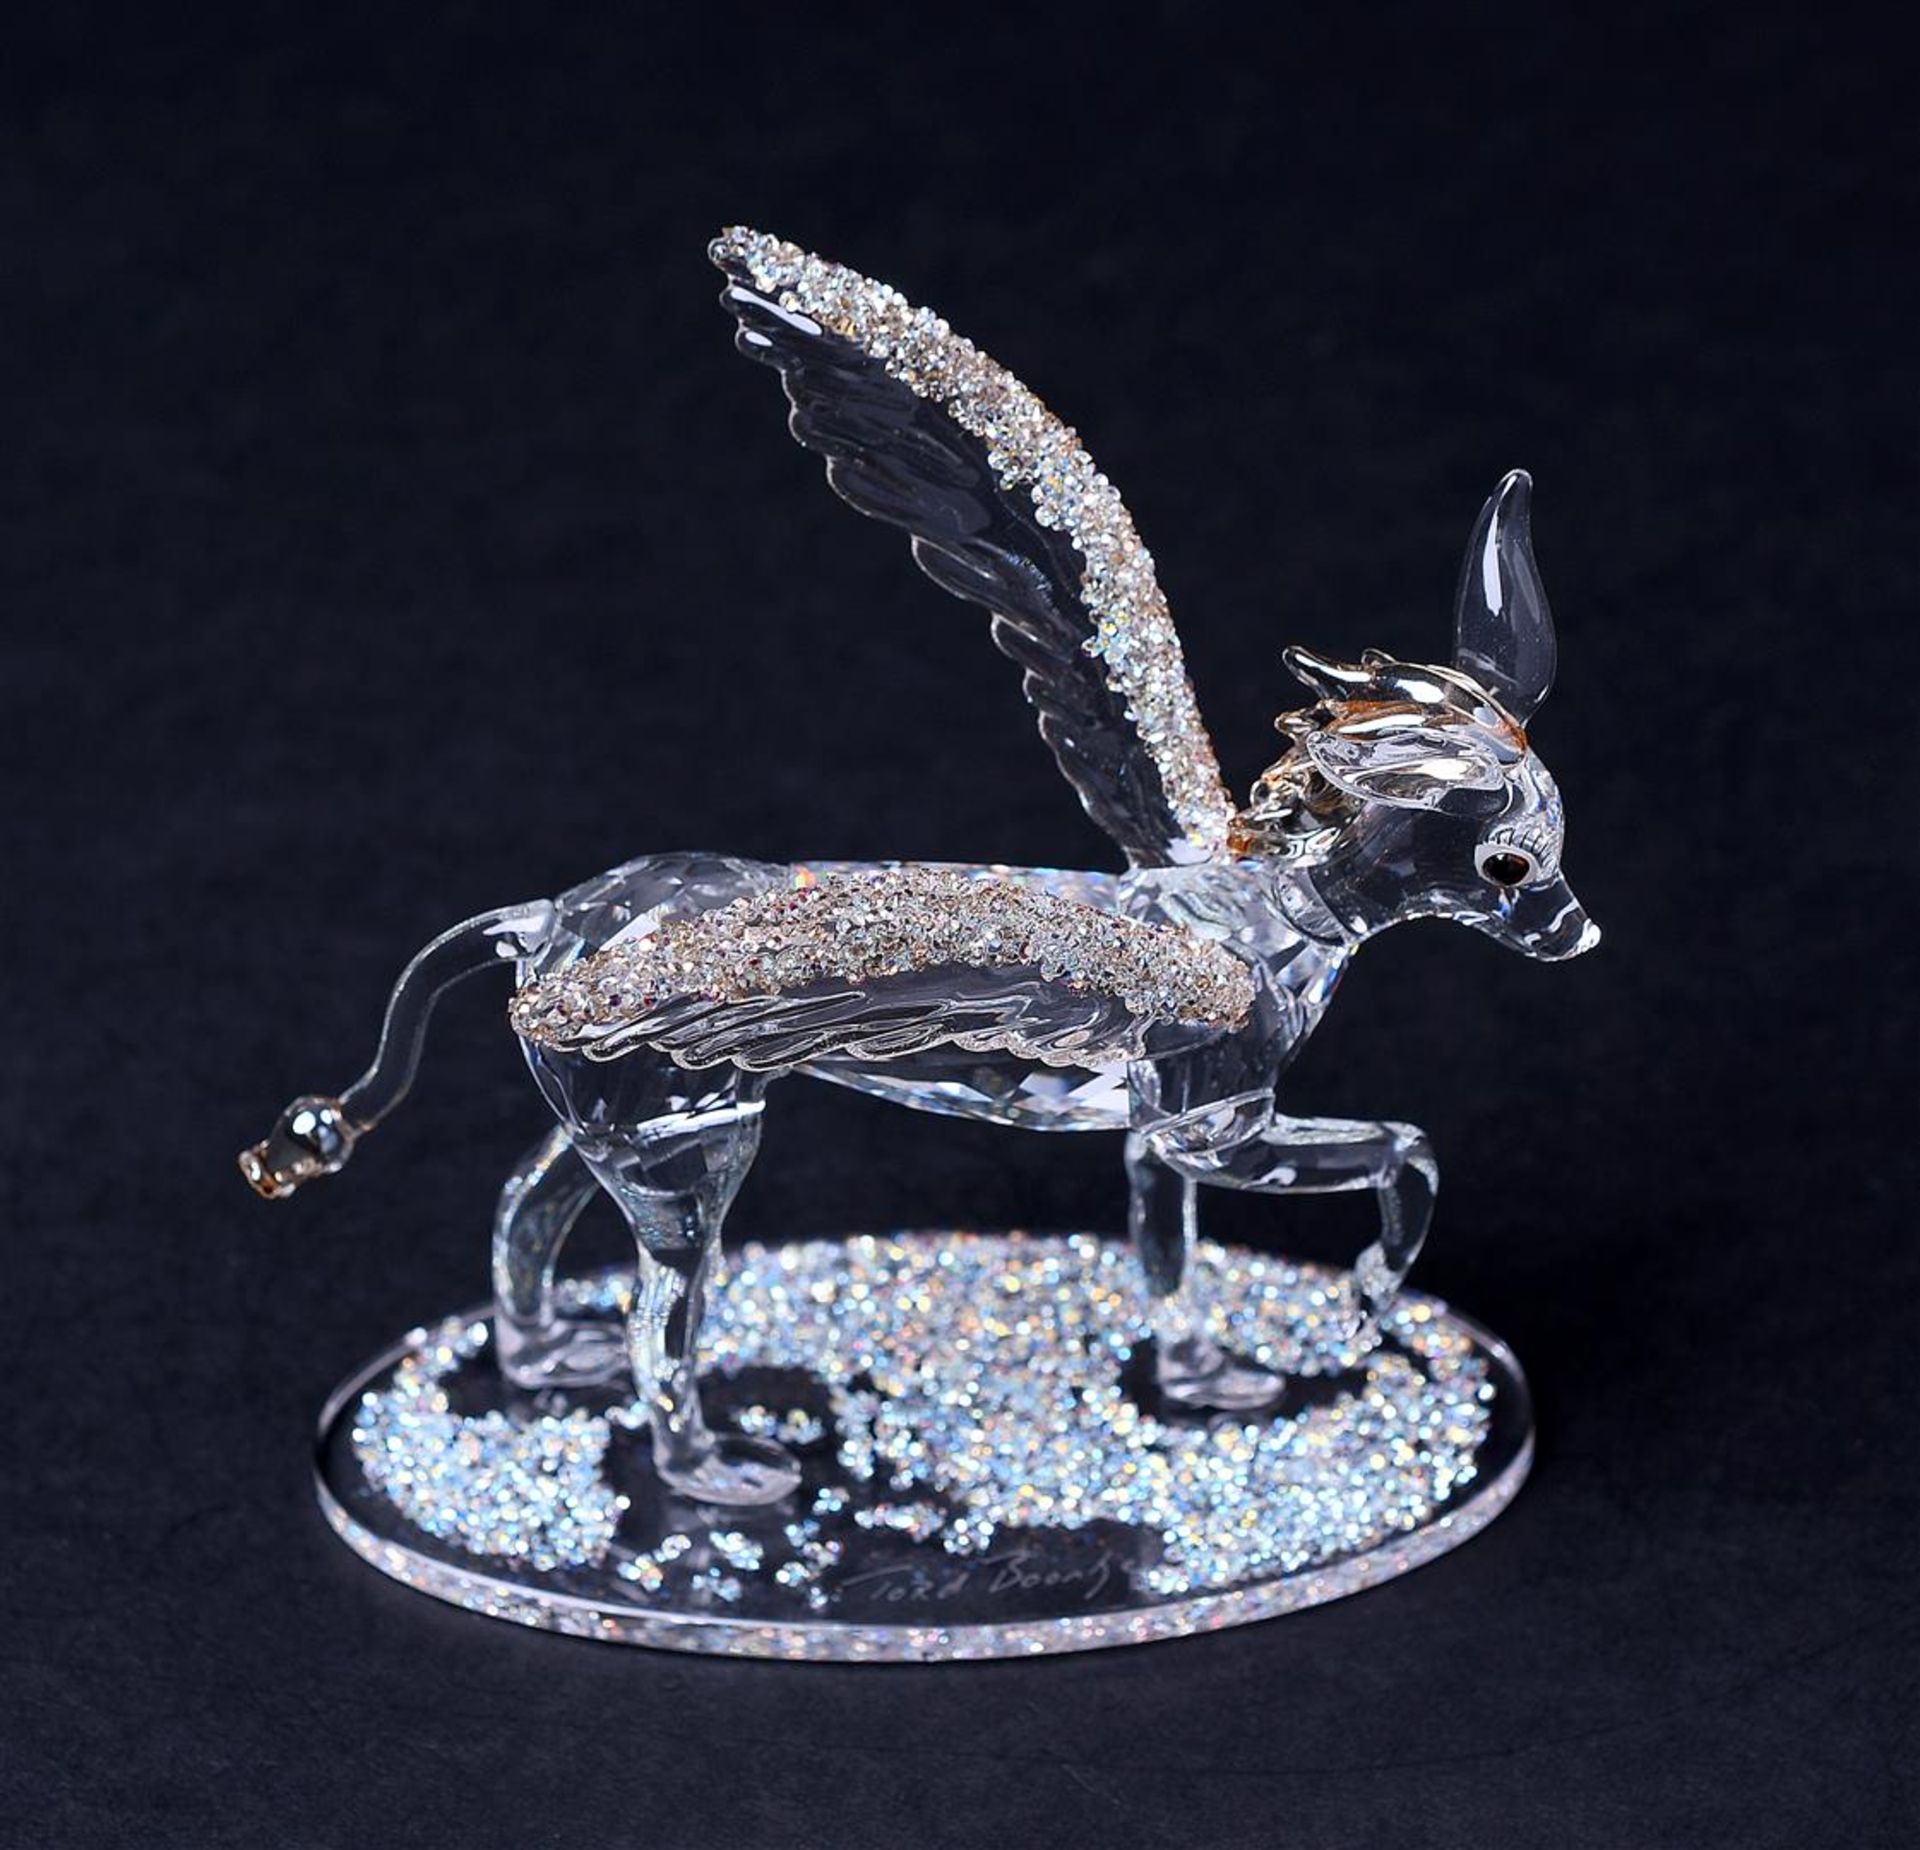 Swarovski, Grazelle limited edition, year of release 2019, design by Tord Boontje, 5464875. Includes - Image 5 of 6